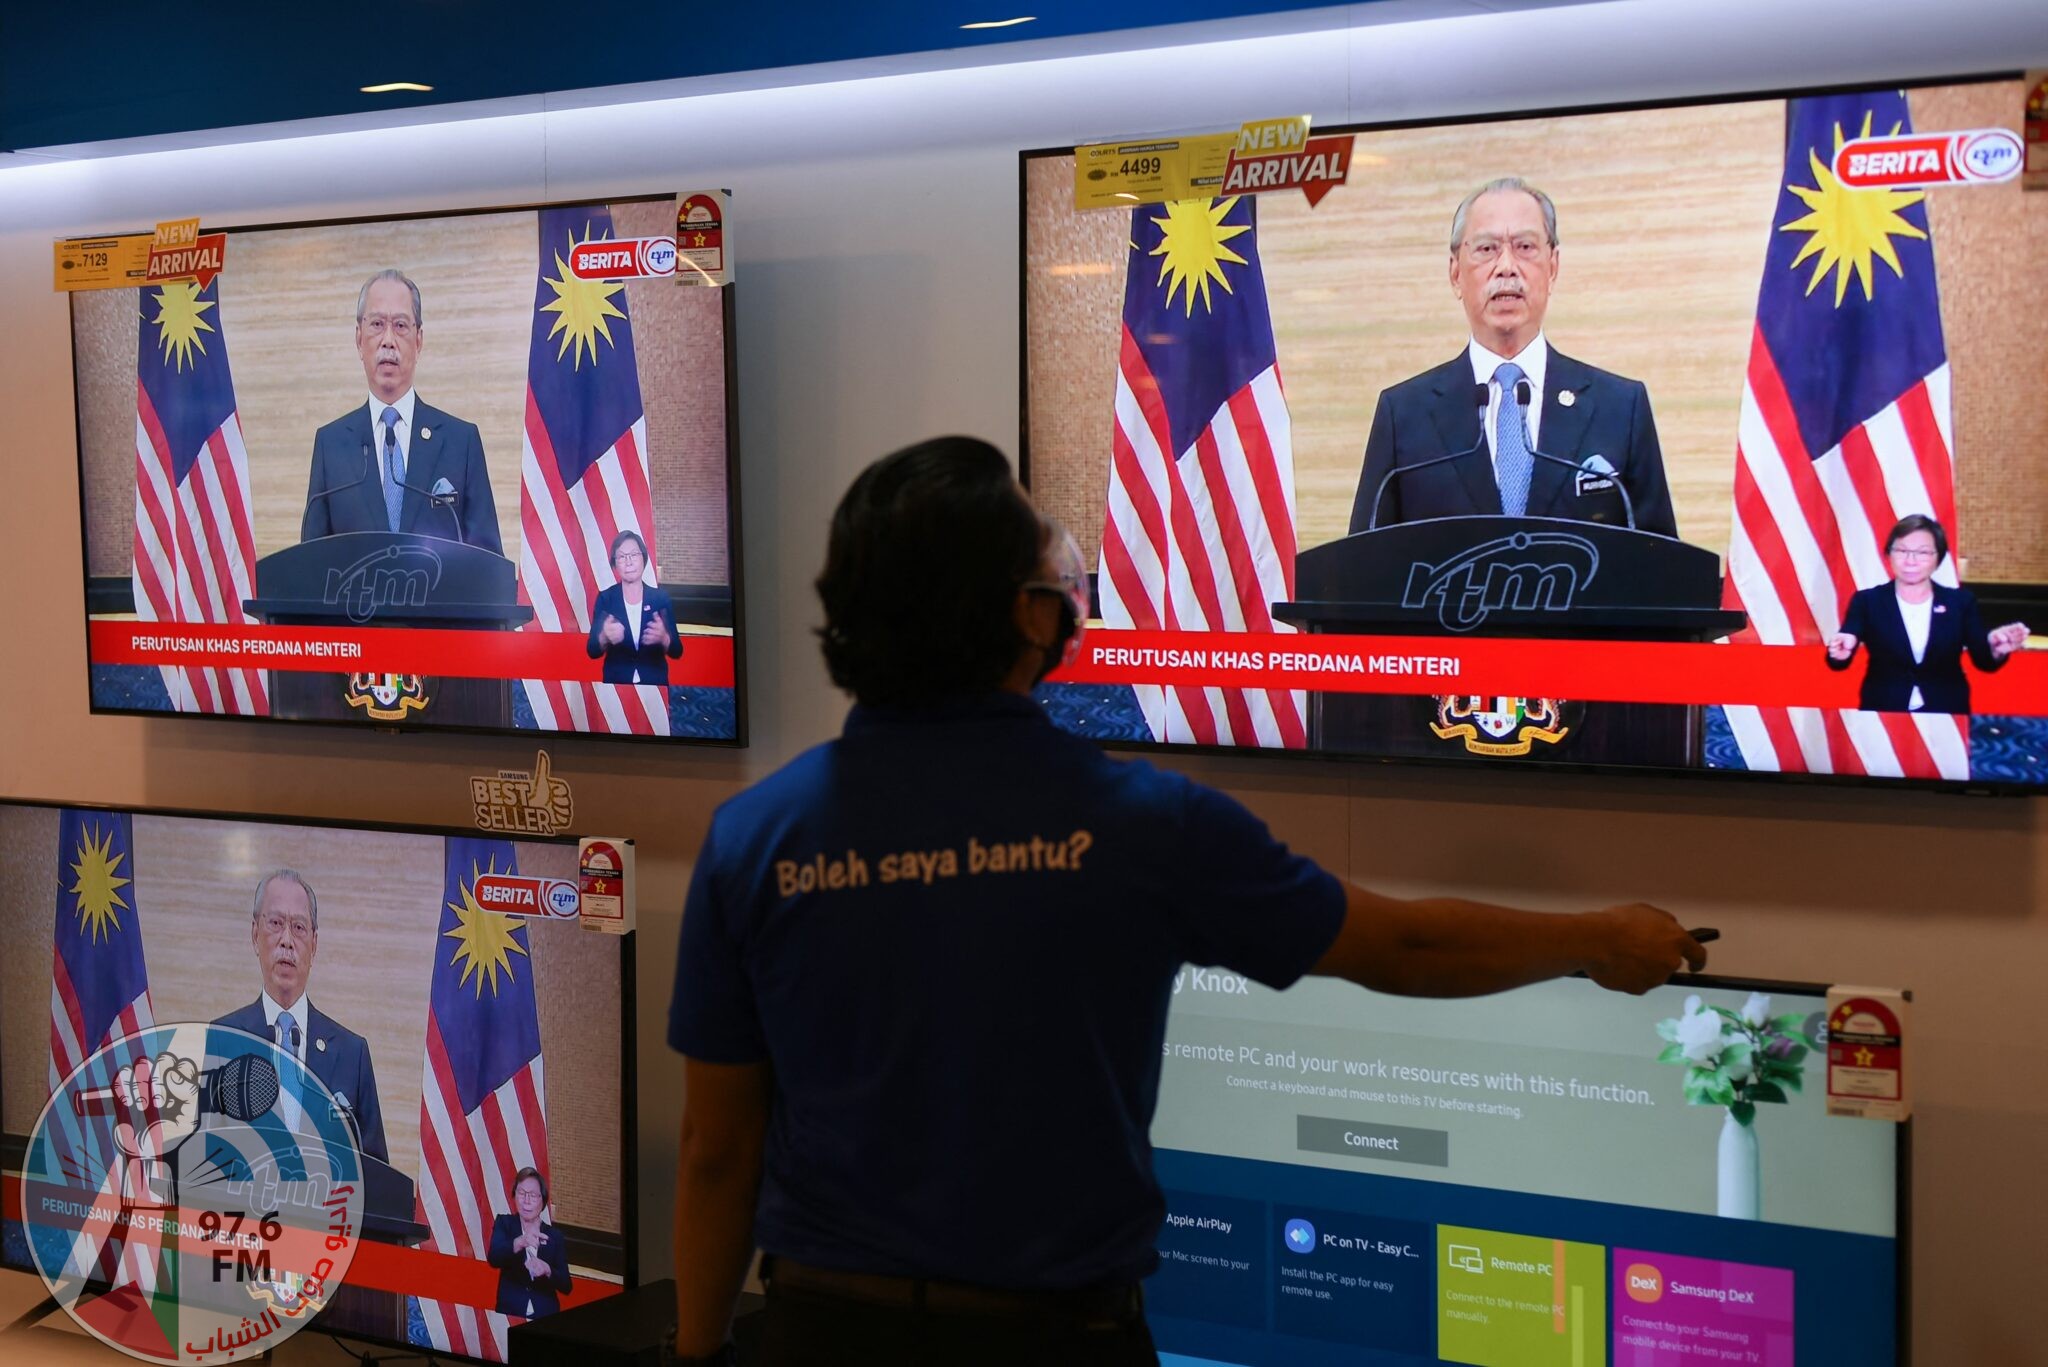 A man watches a television on display at a shopping mall store as Malaysian Prime Minister Muhyiddin Yassin announces his resignation as he addresses the nation during a live telecast in Kuala Lumpur on August 16, 2021. (Photo by Arif KARTONO / AFP)